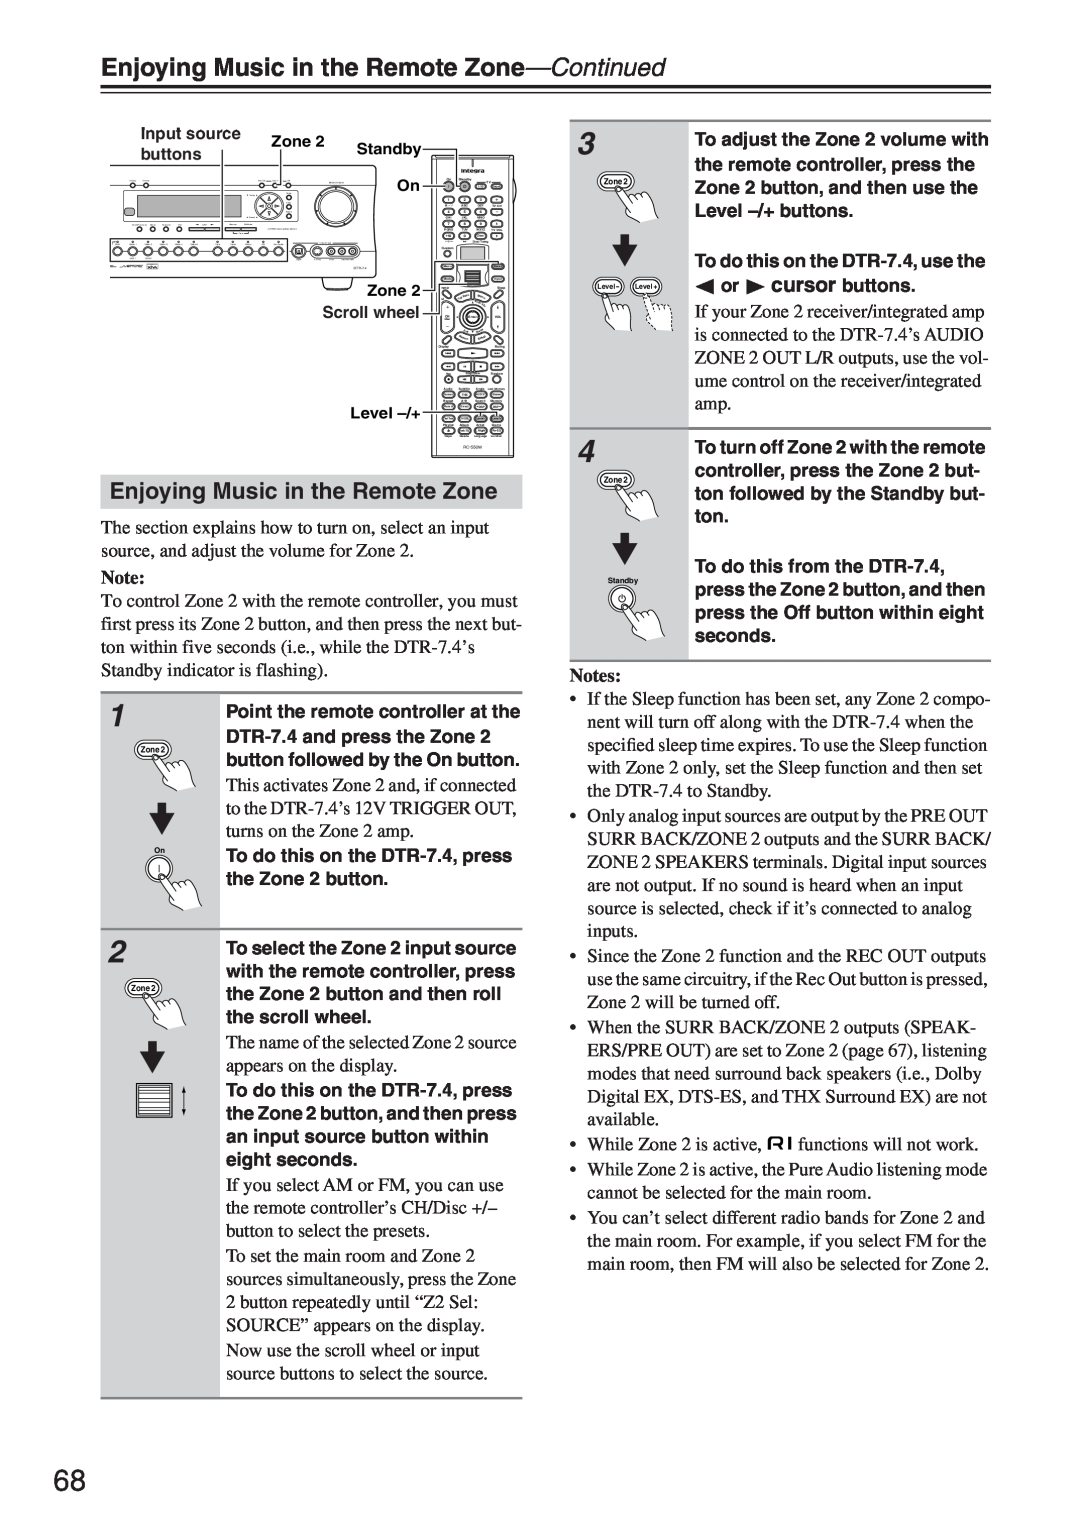 Integra DTR-7.4 instruction manual Enjoying Music in the Remote Zone—Continued, Notes, appears on the display 